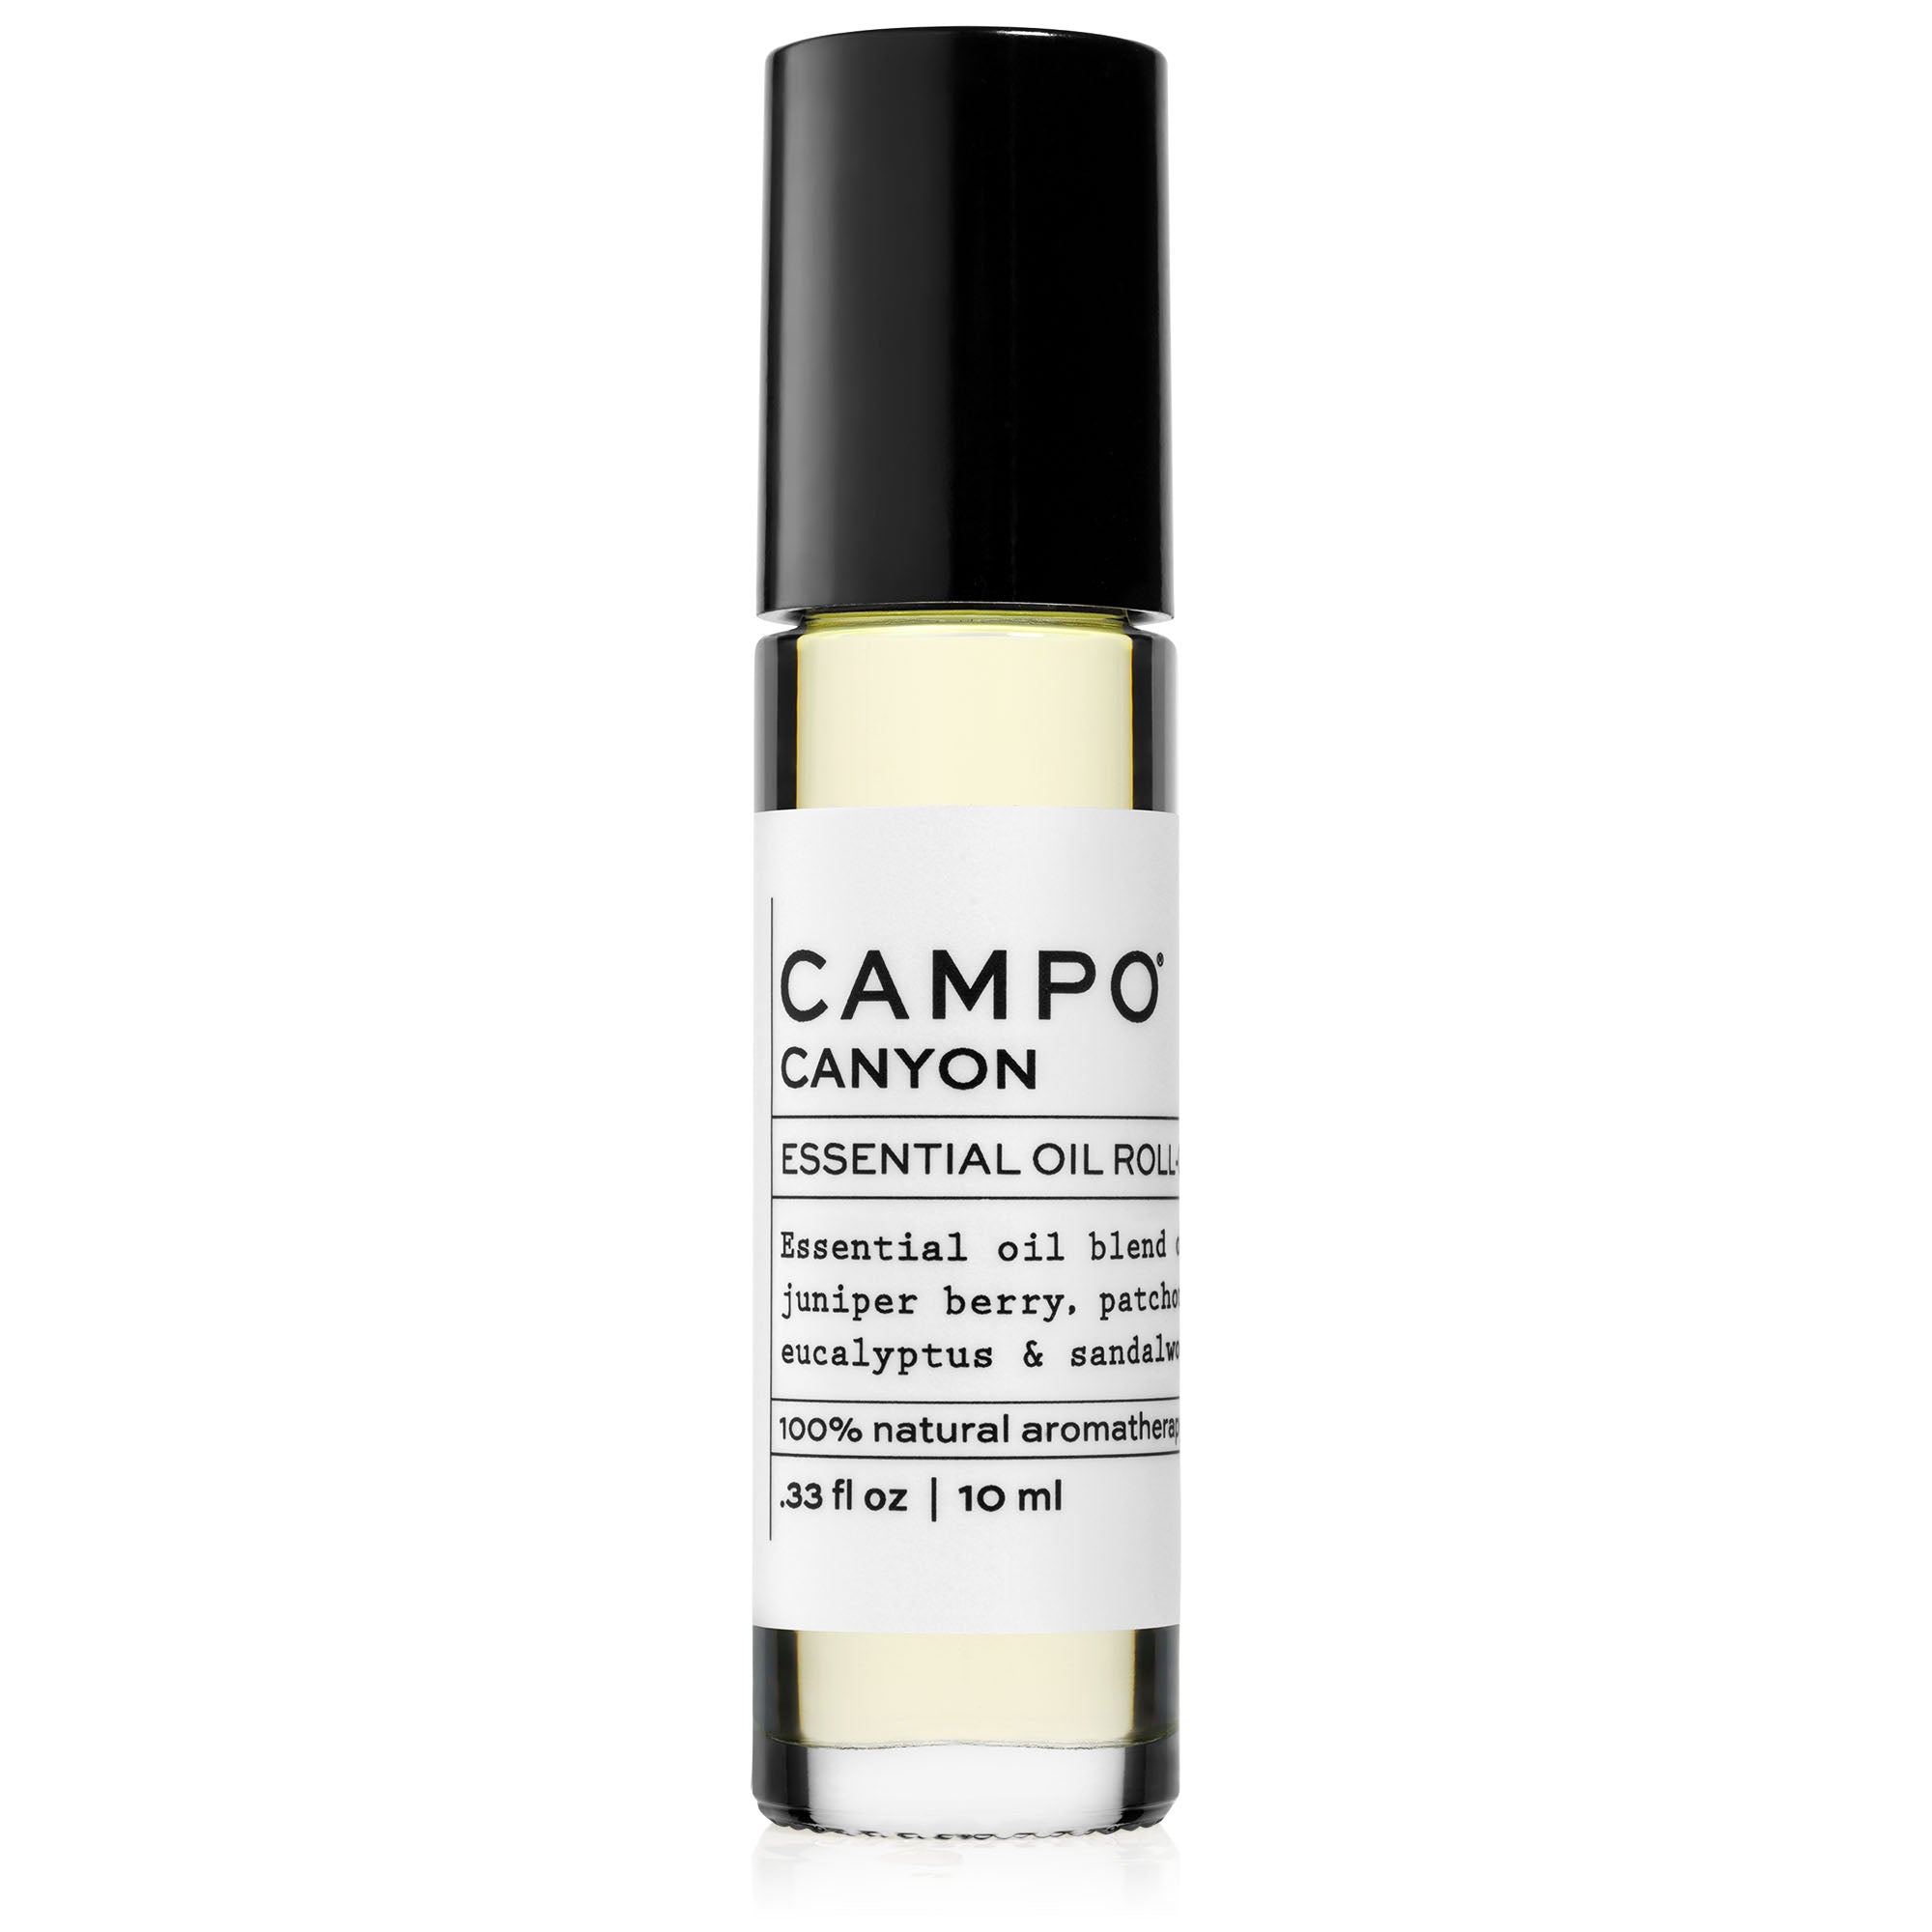 WOODS Beauty Essential Oil CANYON Roll-On in 5 ml. Escape to the canyon with this 100% pure essential oil blend of juniper berry, patchouli, eucalyptus radiate, and sandalwood. Inspired by hikes through rustling eucalyptus, juniper berry & patchouli-filled mountains.